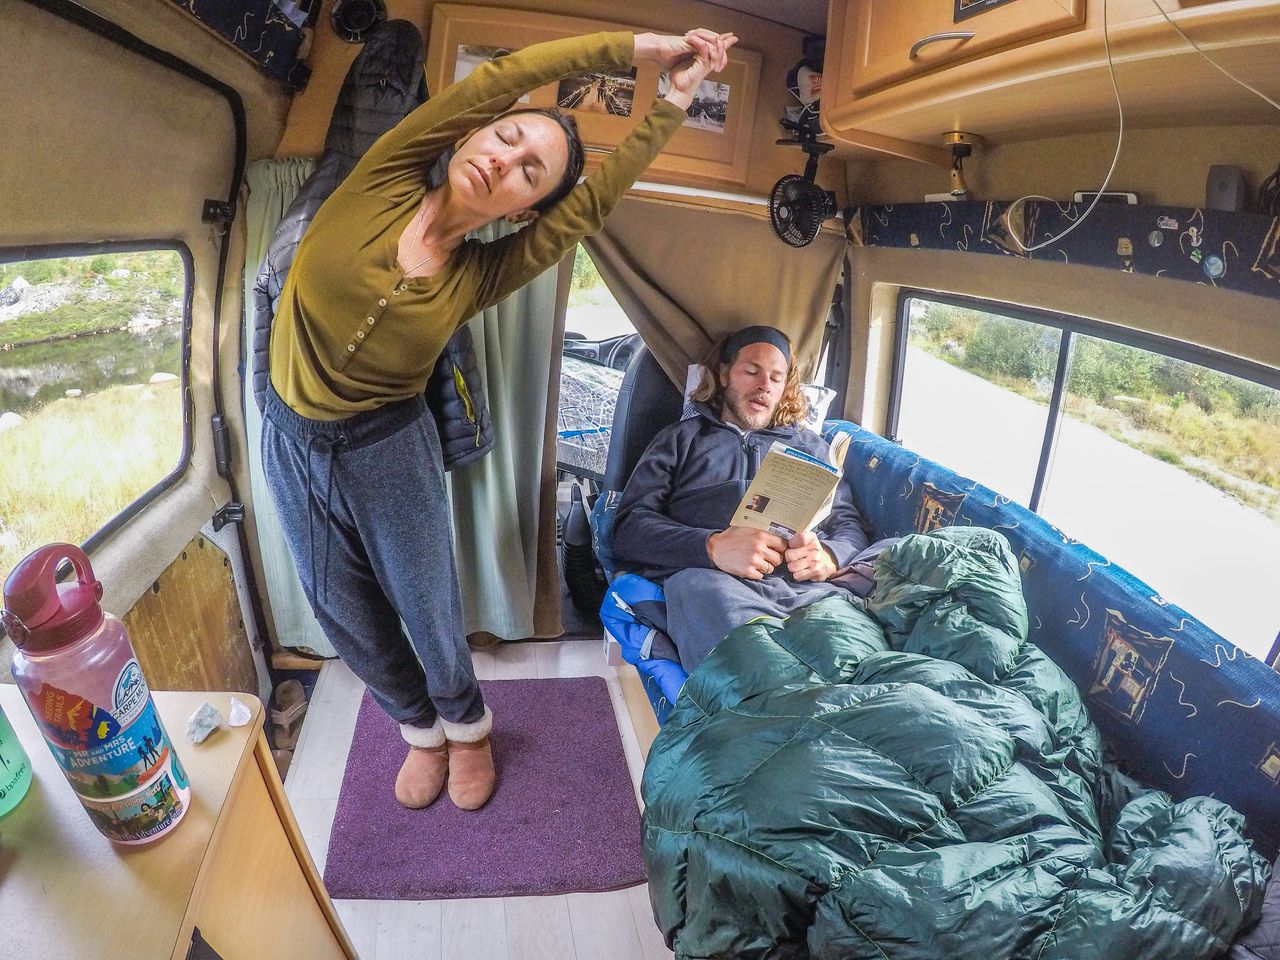 Brittany and Drew relaxing inside their van the day after summiting the highest peak in Norway, August 2017.